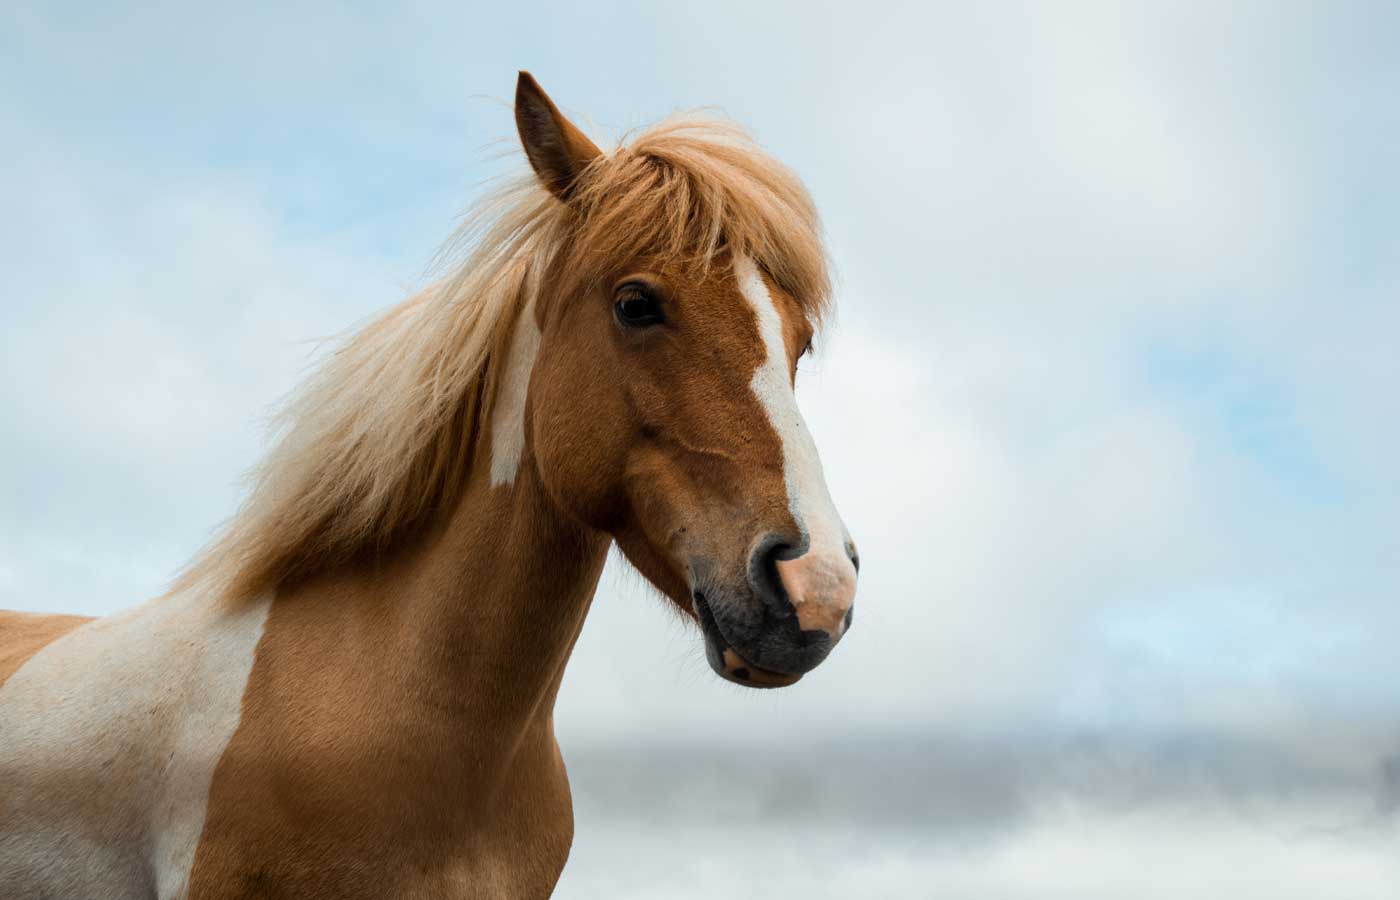 Horse insurance quote - Shows a close-up of a beautiful horse